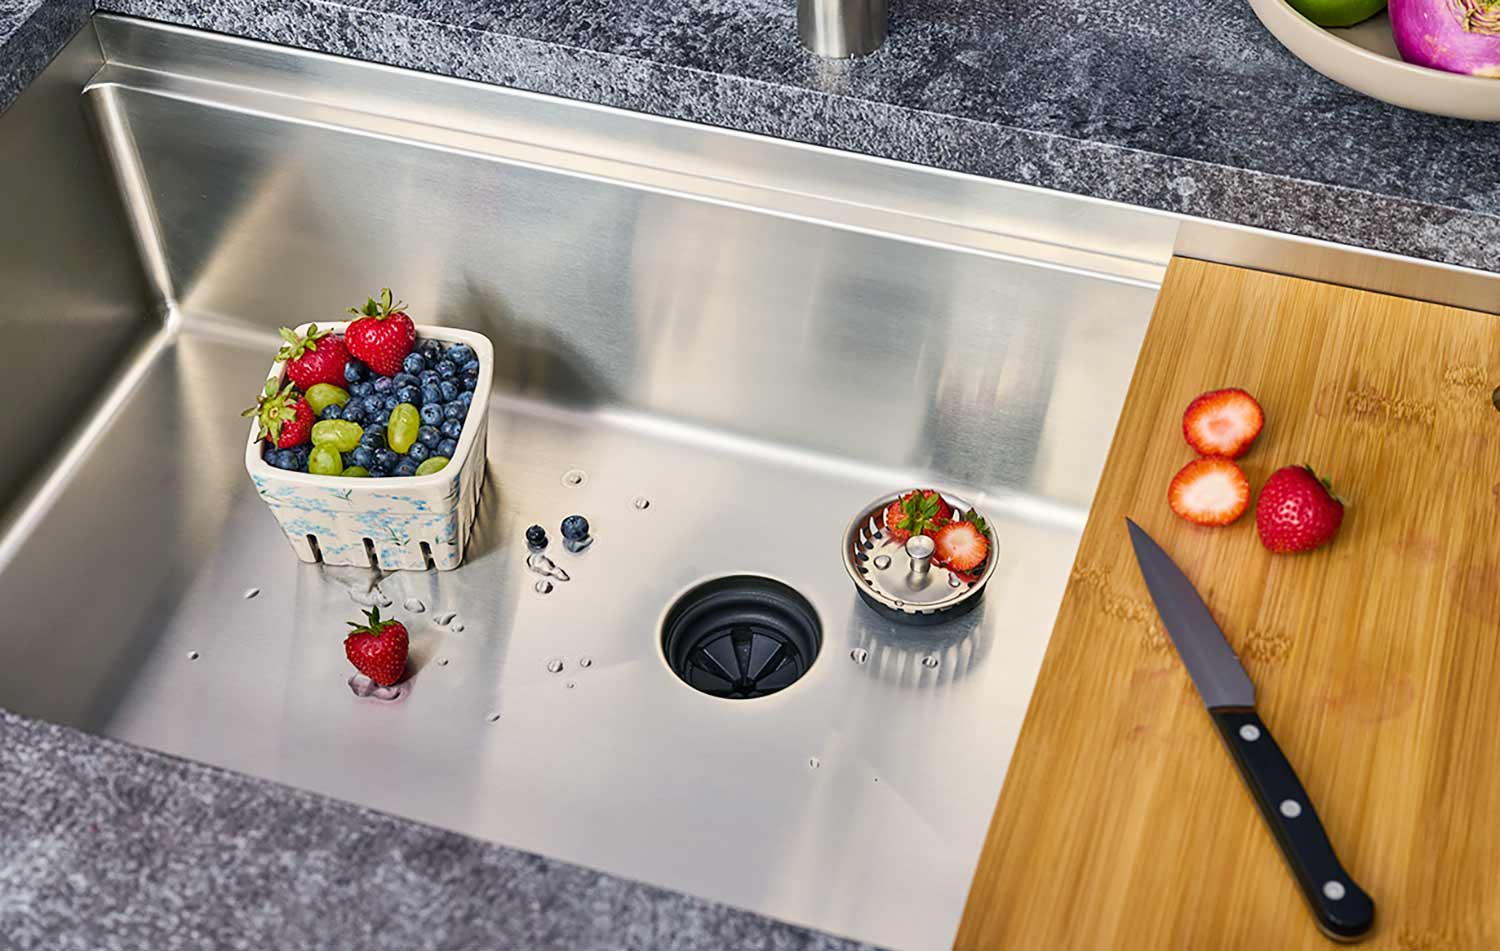 Create Good Sinks patented Seamless Drain create a seamless visual experience in the kitchen sink. The perfect drain solution to cleanliness and aesthetics.